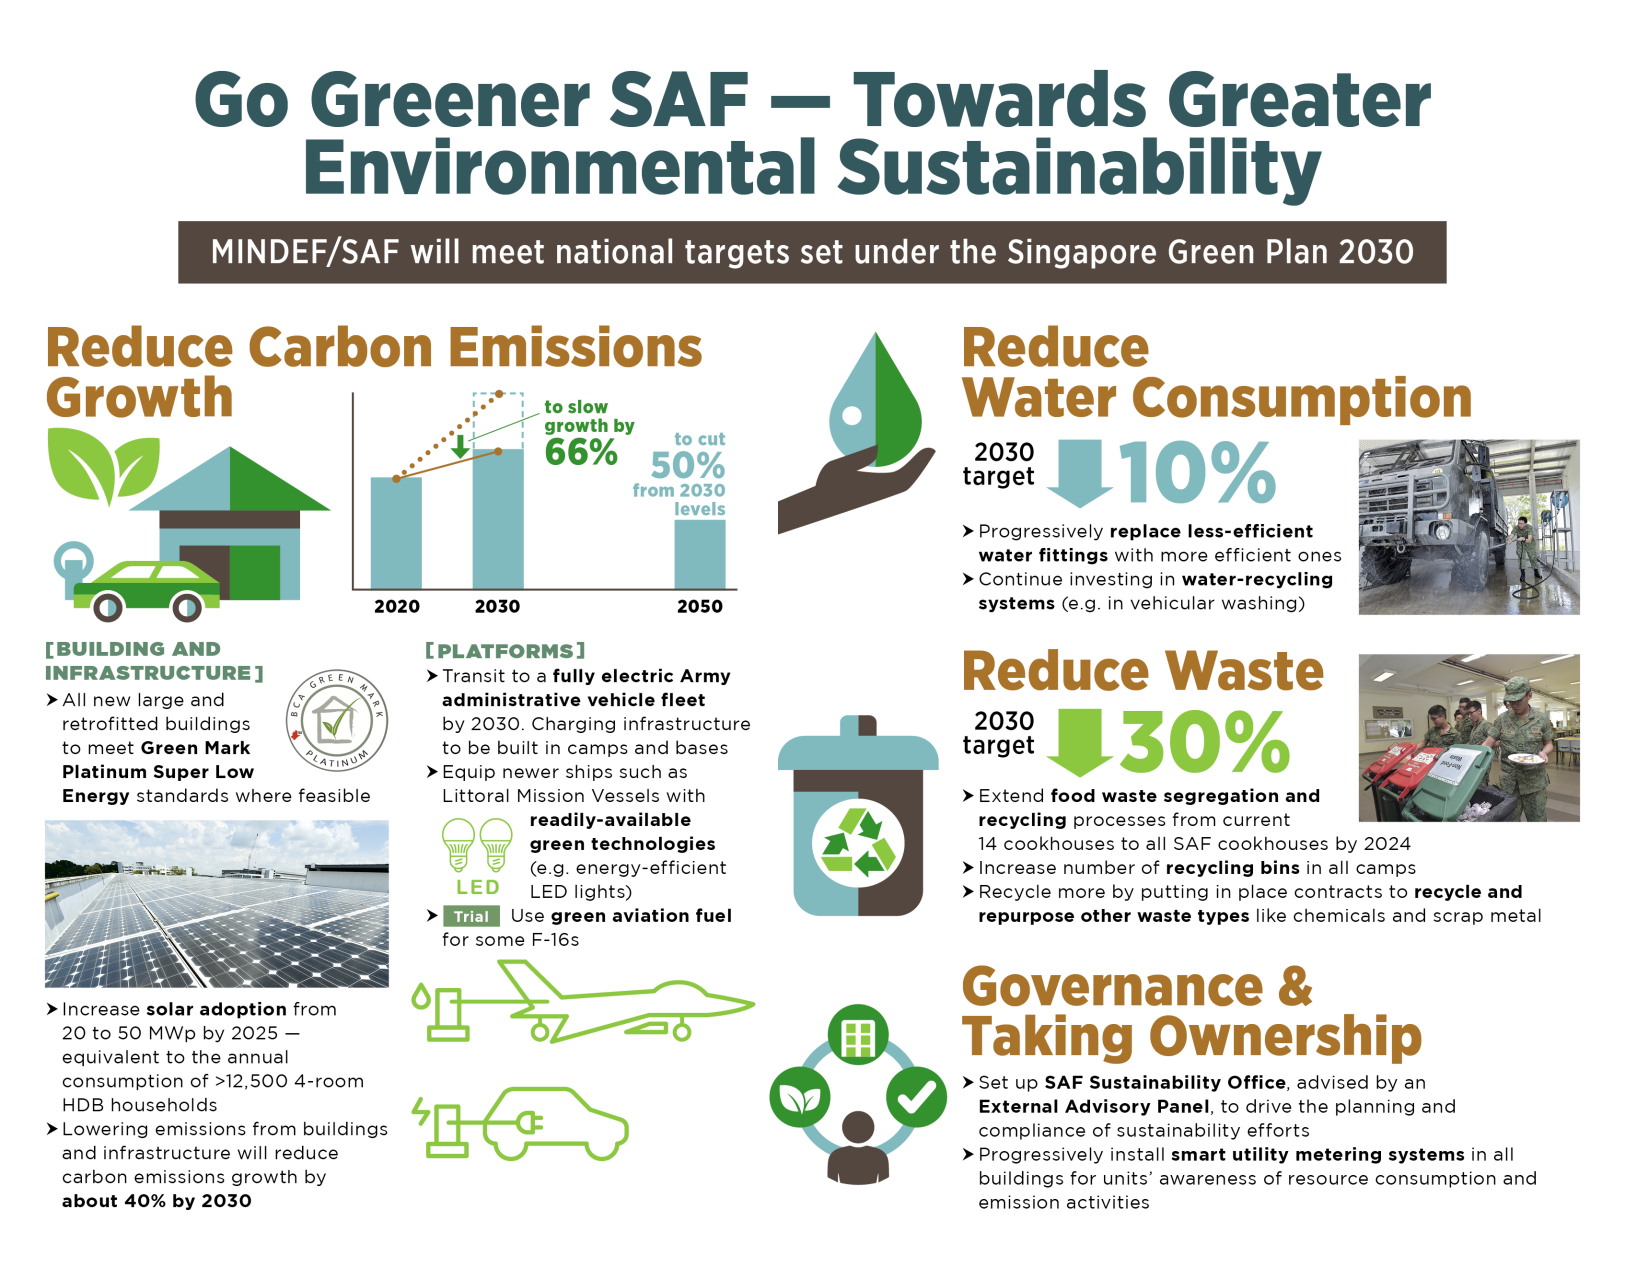 An infographic explaining the benefits of environmental investments, such as reducing carbon emissions, water consumption, and waste, and improving energy efficiency.